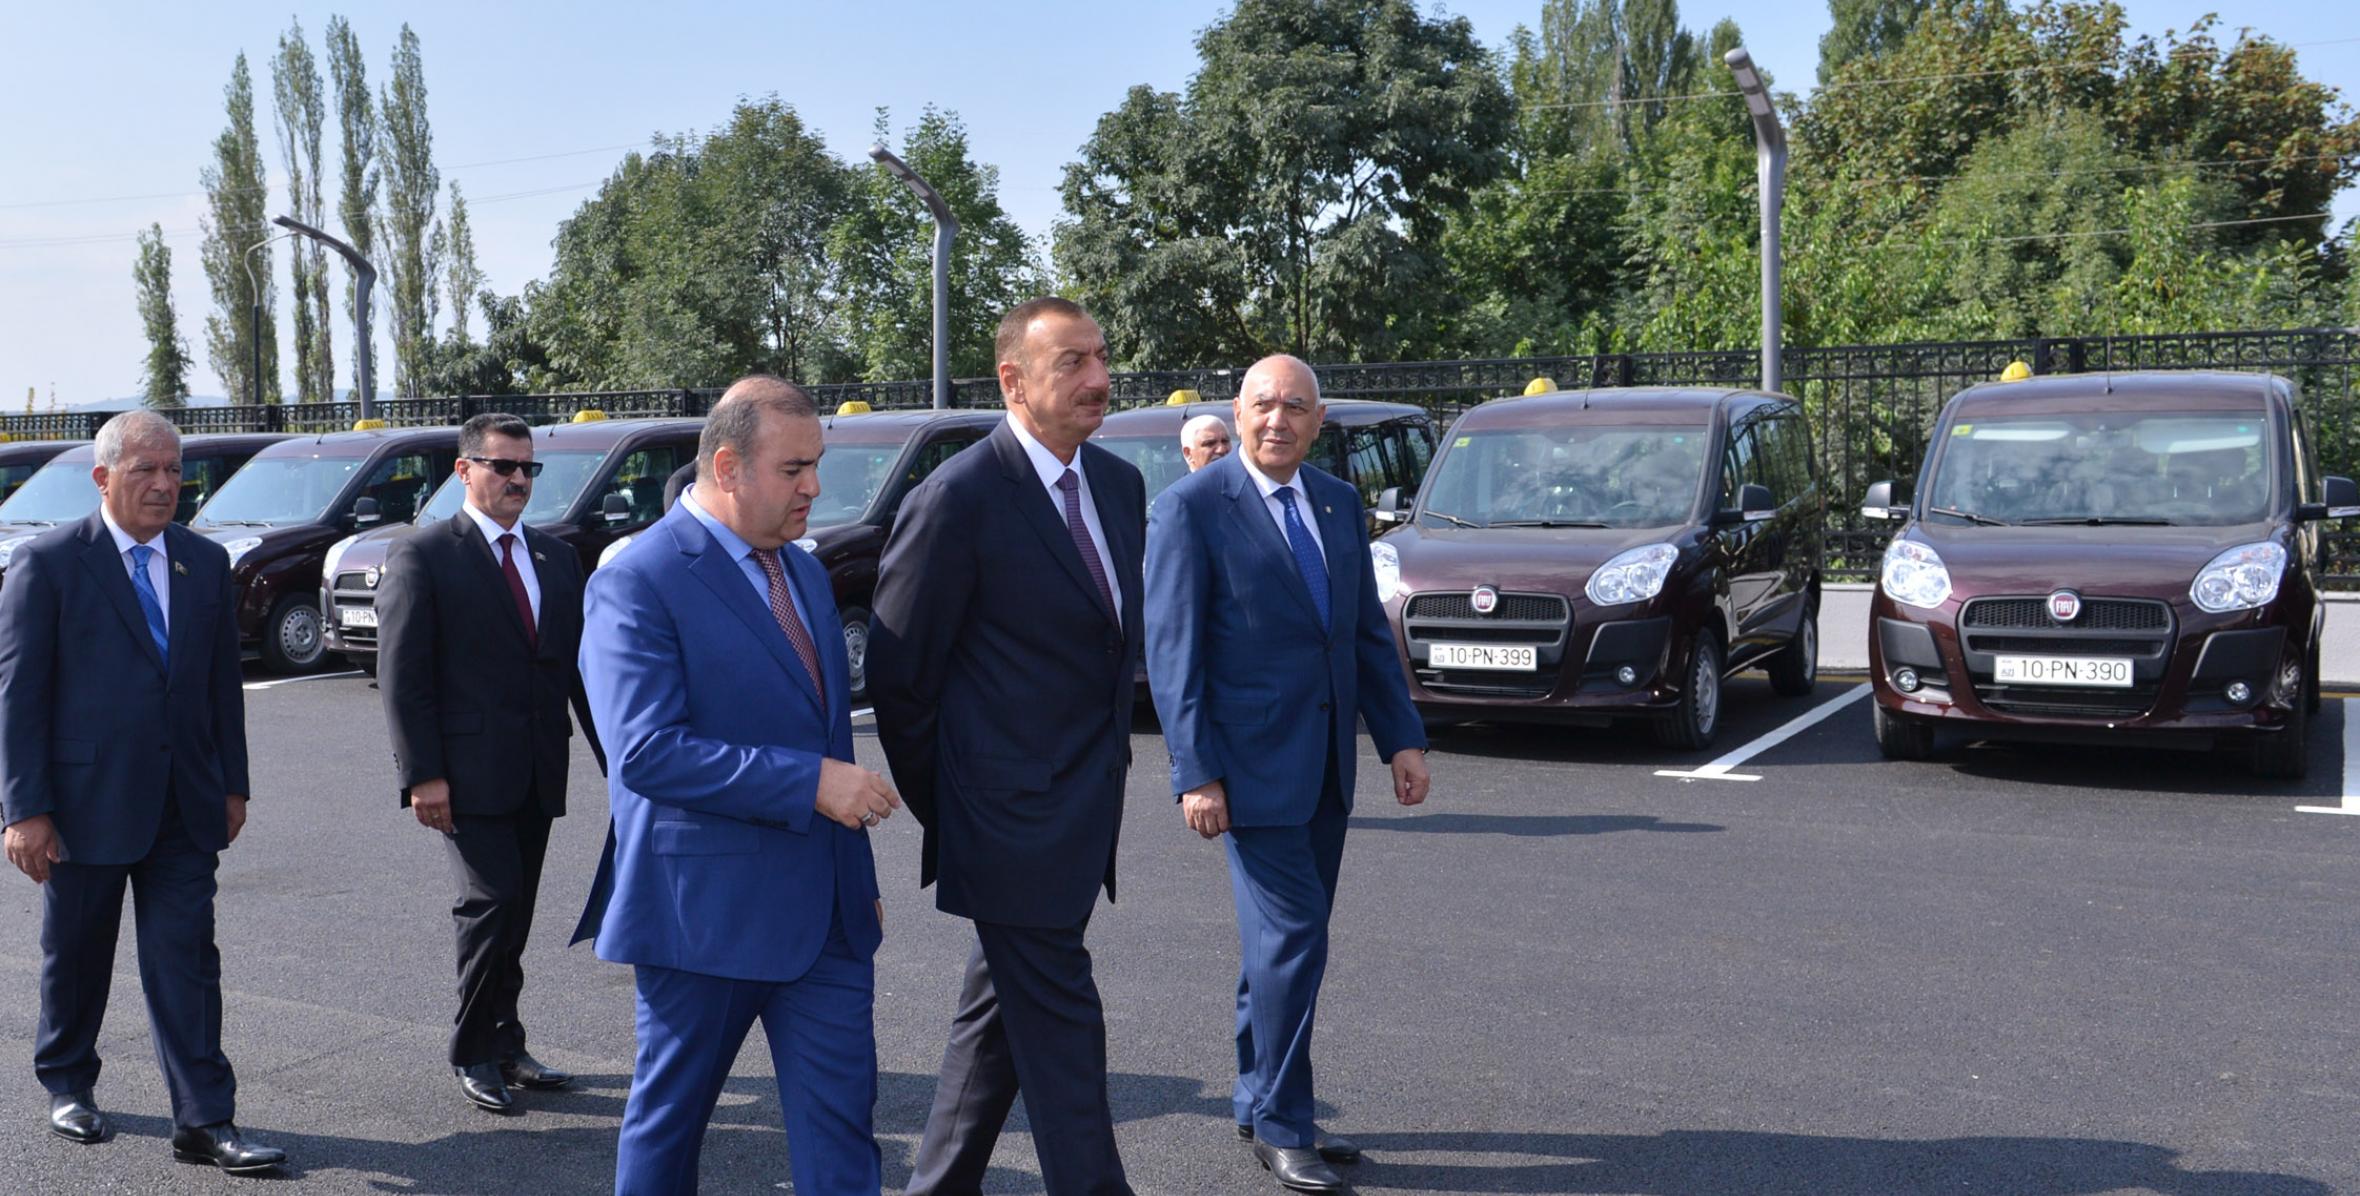 Ilham Aliyev attended the opening of a new bus station in Ismayilli